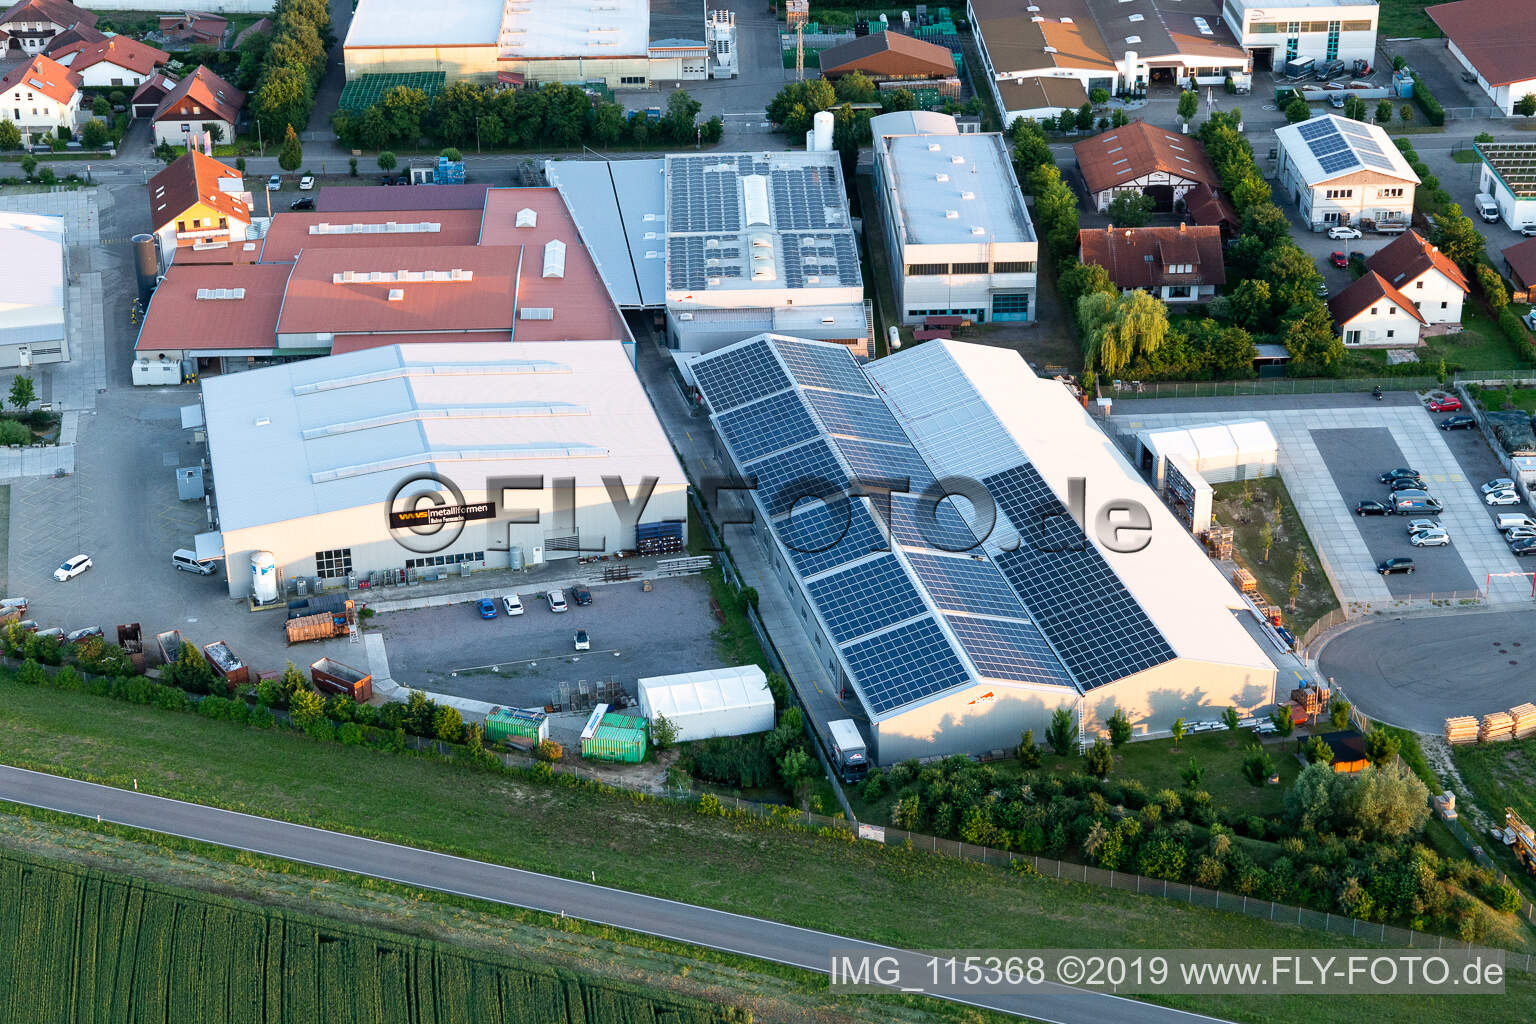 Commercial area Im Gereut, HGGS LaserCUT GmbH & Co. KG in Hatzenbühl in the state Rhineland-Palatinate, Germany seen from a drone